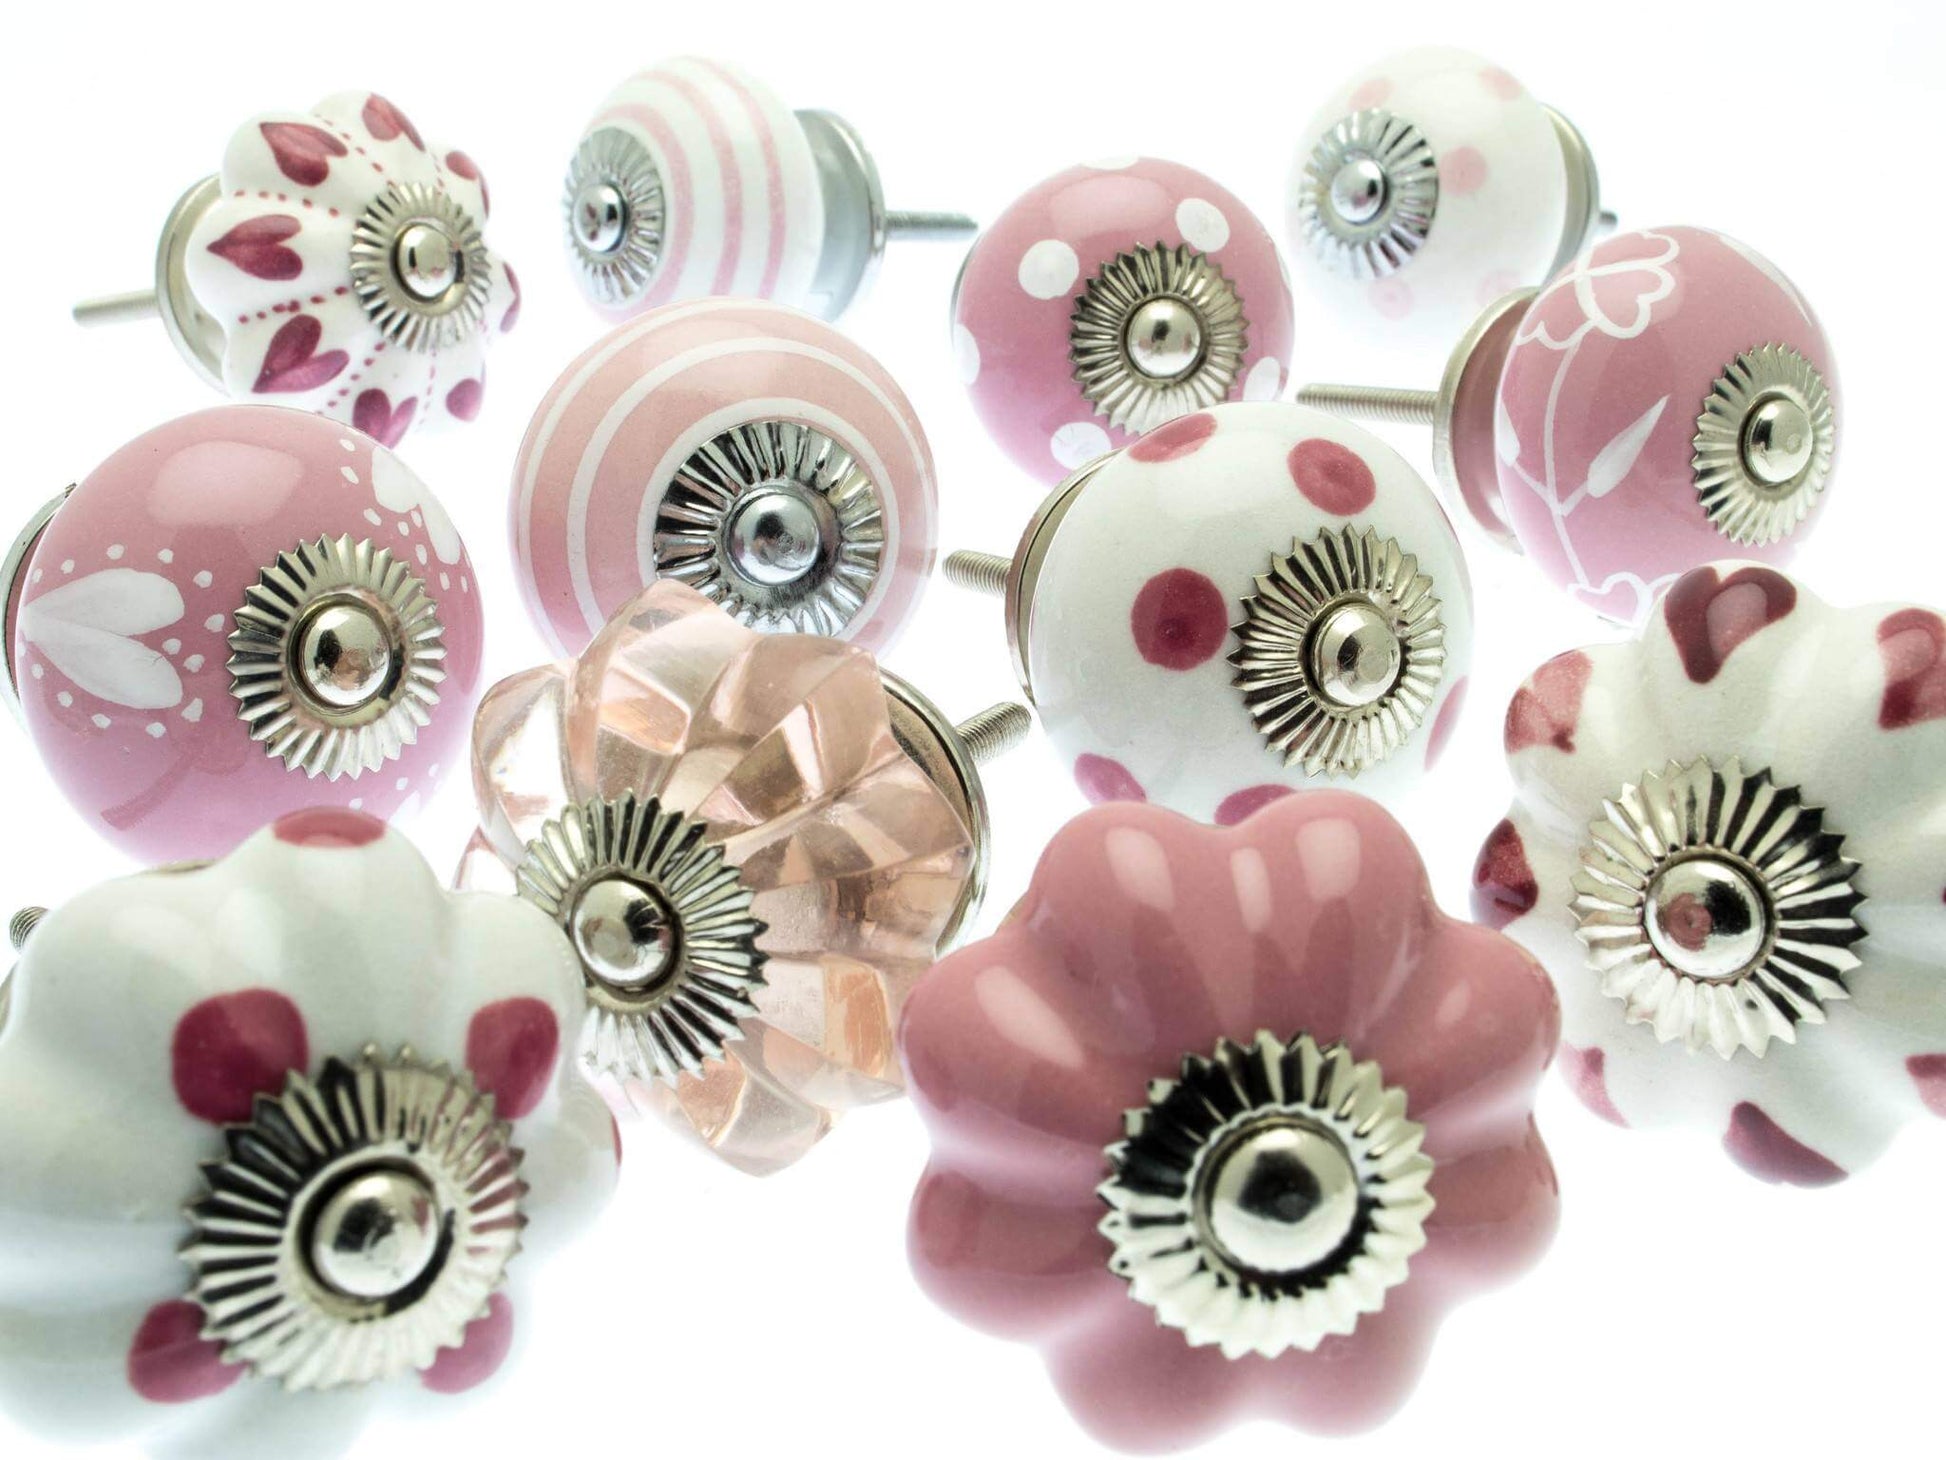 Ceramic Cupboard Knobs - Set Of 12 Mixed Pinks And White Pretty Hearts And Dots Ceramic Knobs (MG-274)